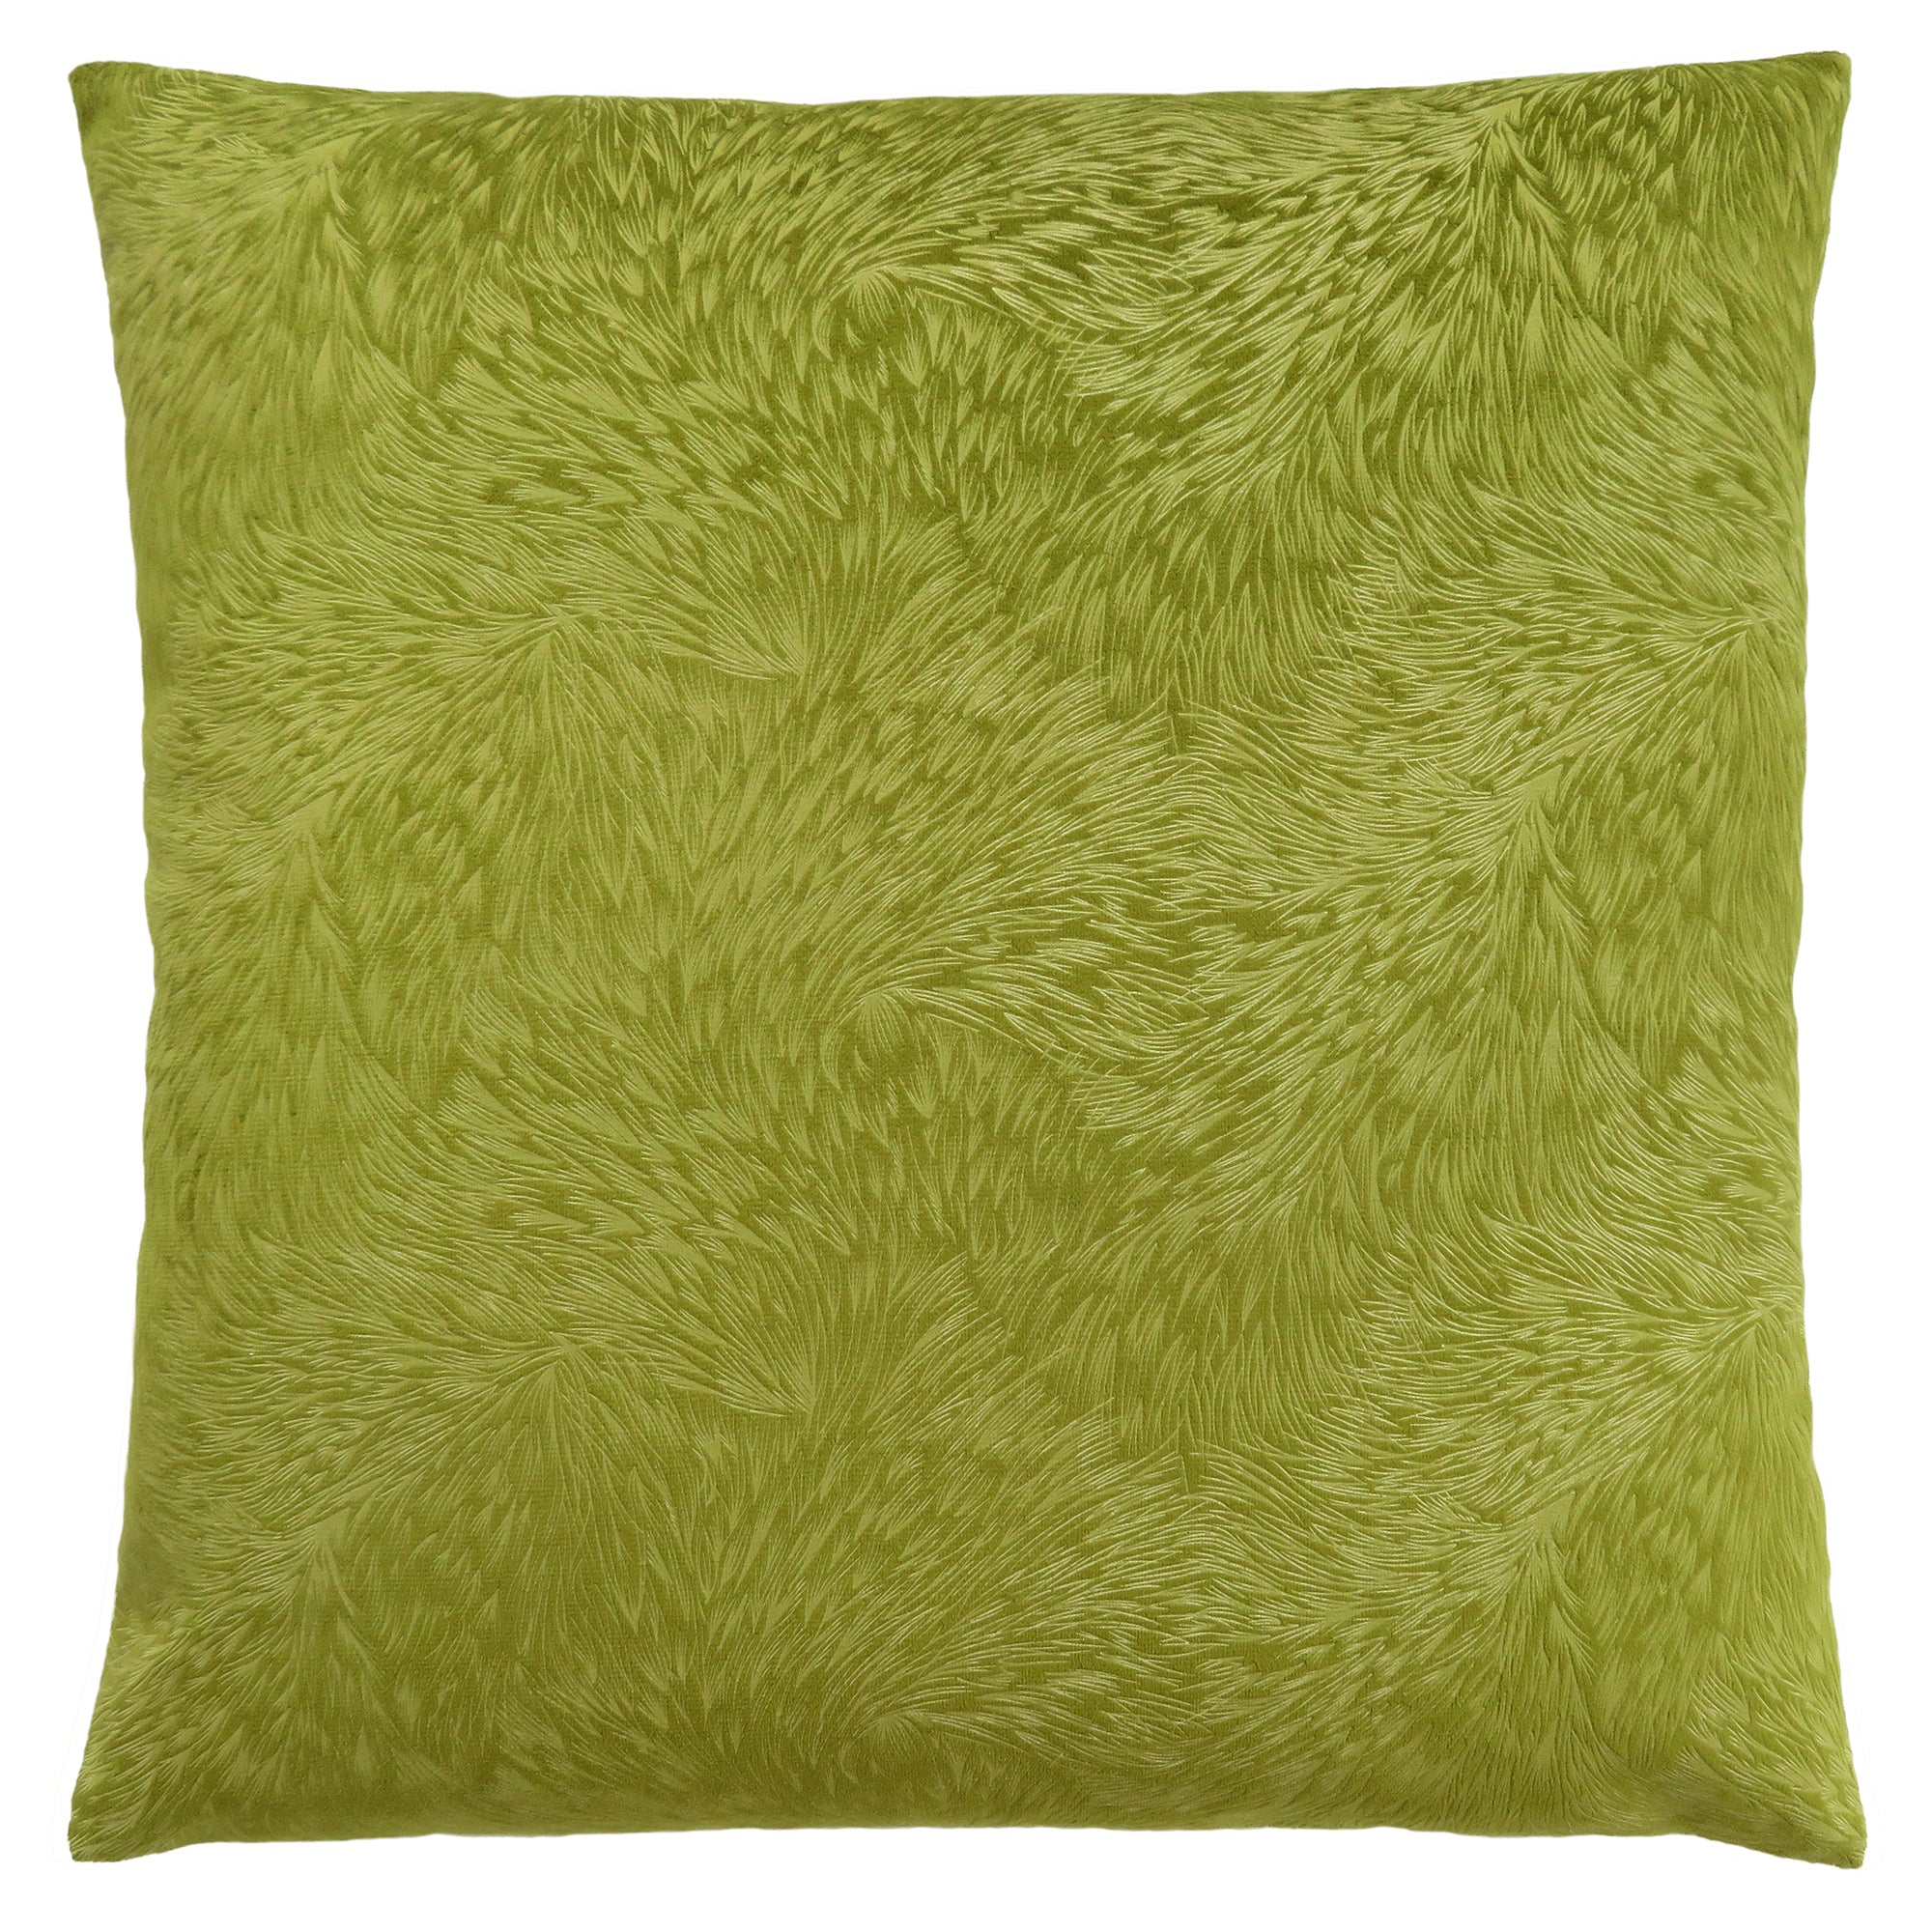 Pillow - 18X 18 / Lime Green Feathered Velvet / 1Pc